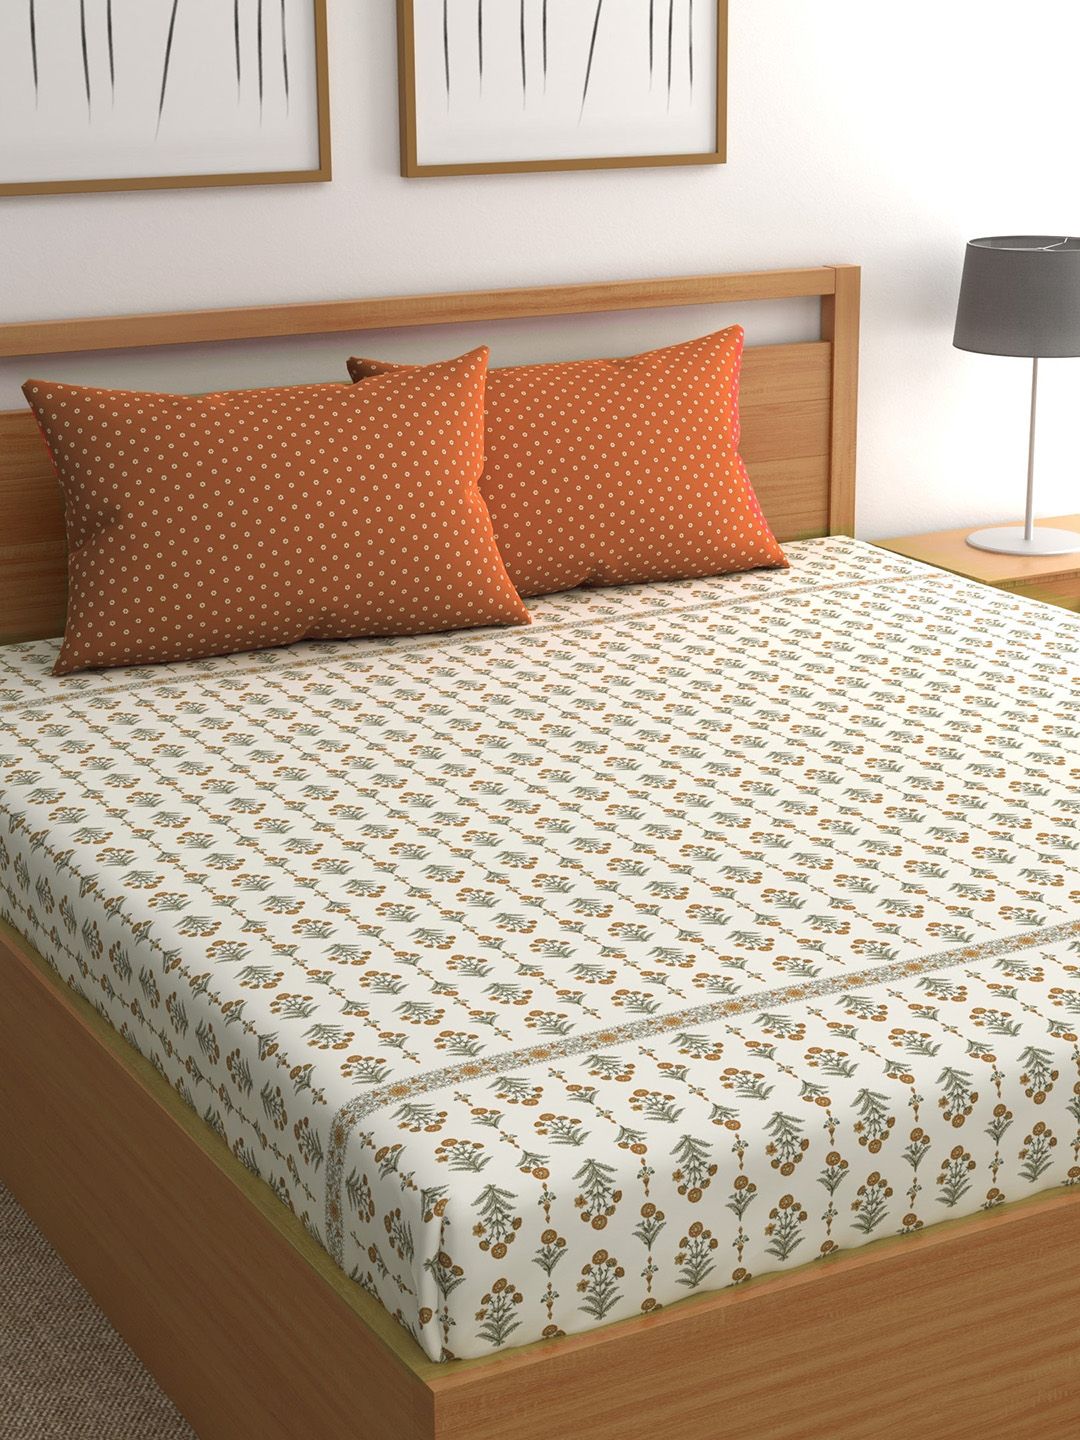 CHHAVI INDIA Cream-Coloured Floral 210 TC Queen Bedsheet with 2 Pillow Covers Price in India